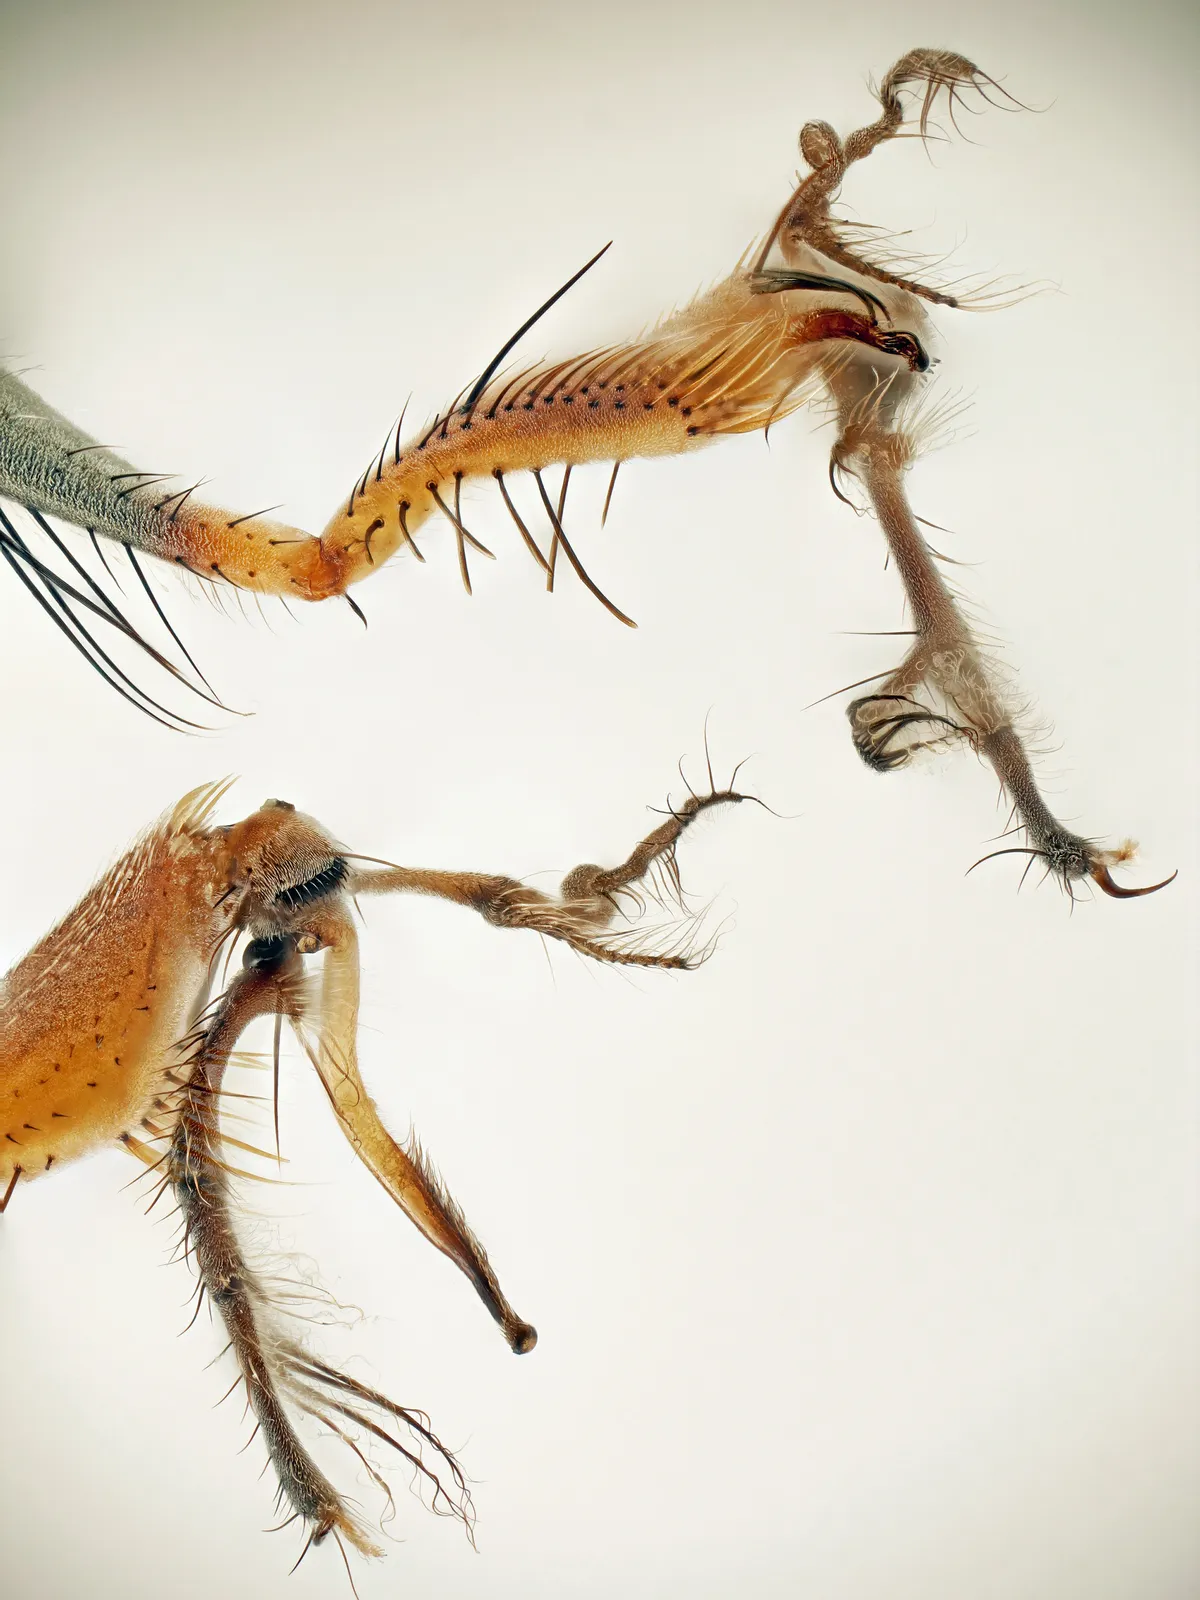 The front legs of a male Campsicnemus magius highlighting its ribbons and bristles (image taken by Dawn painter of an NHM specimen)